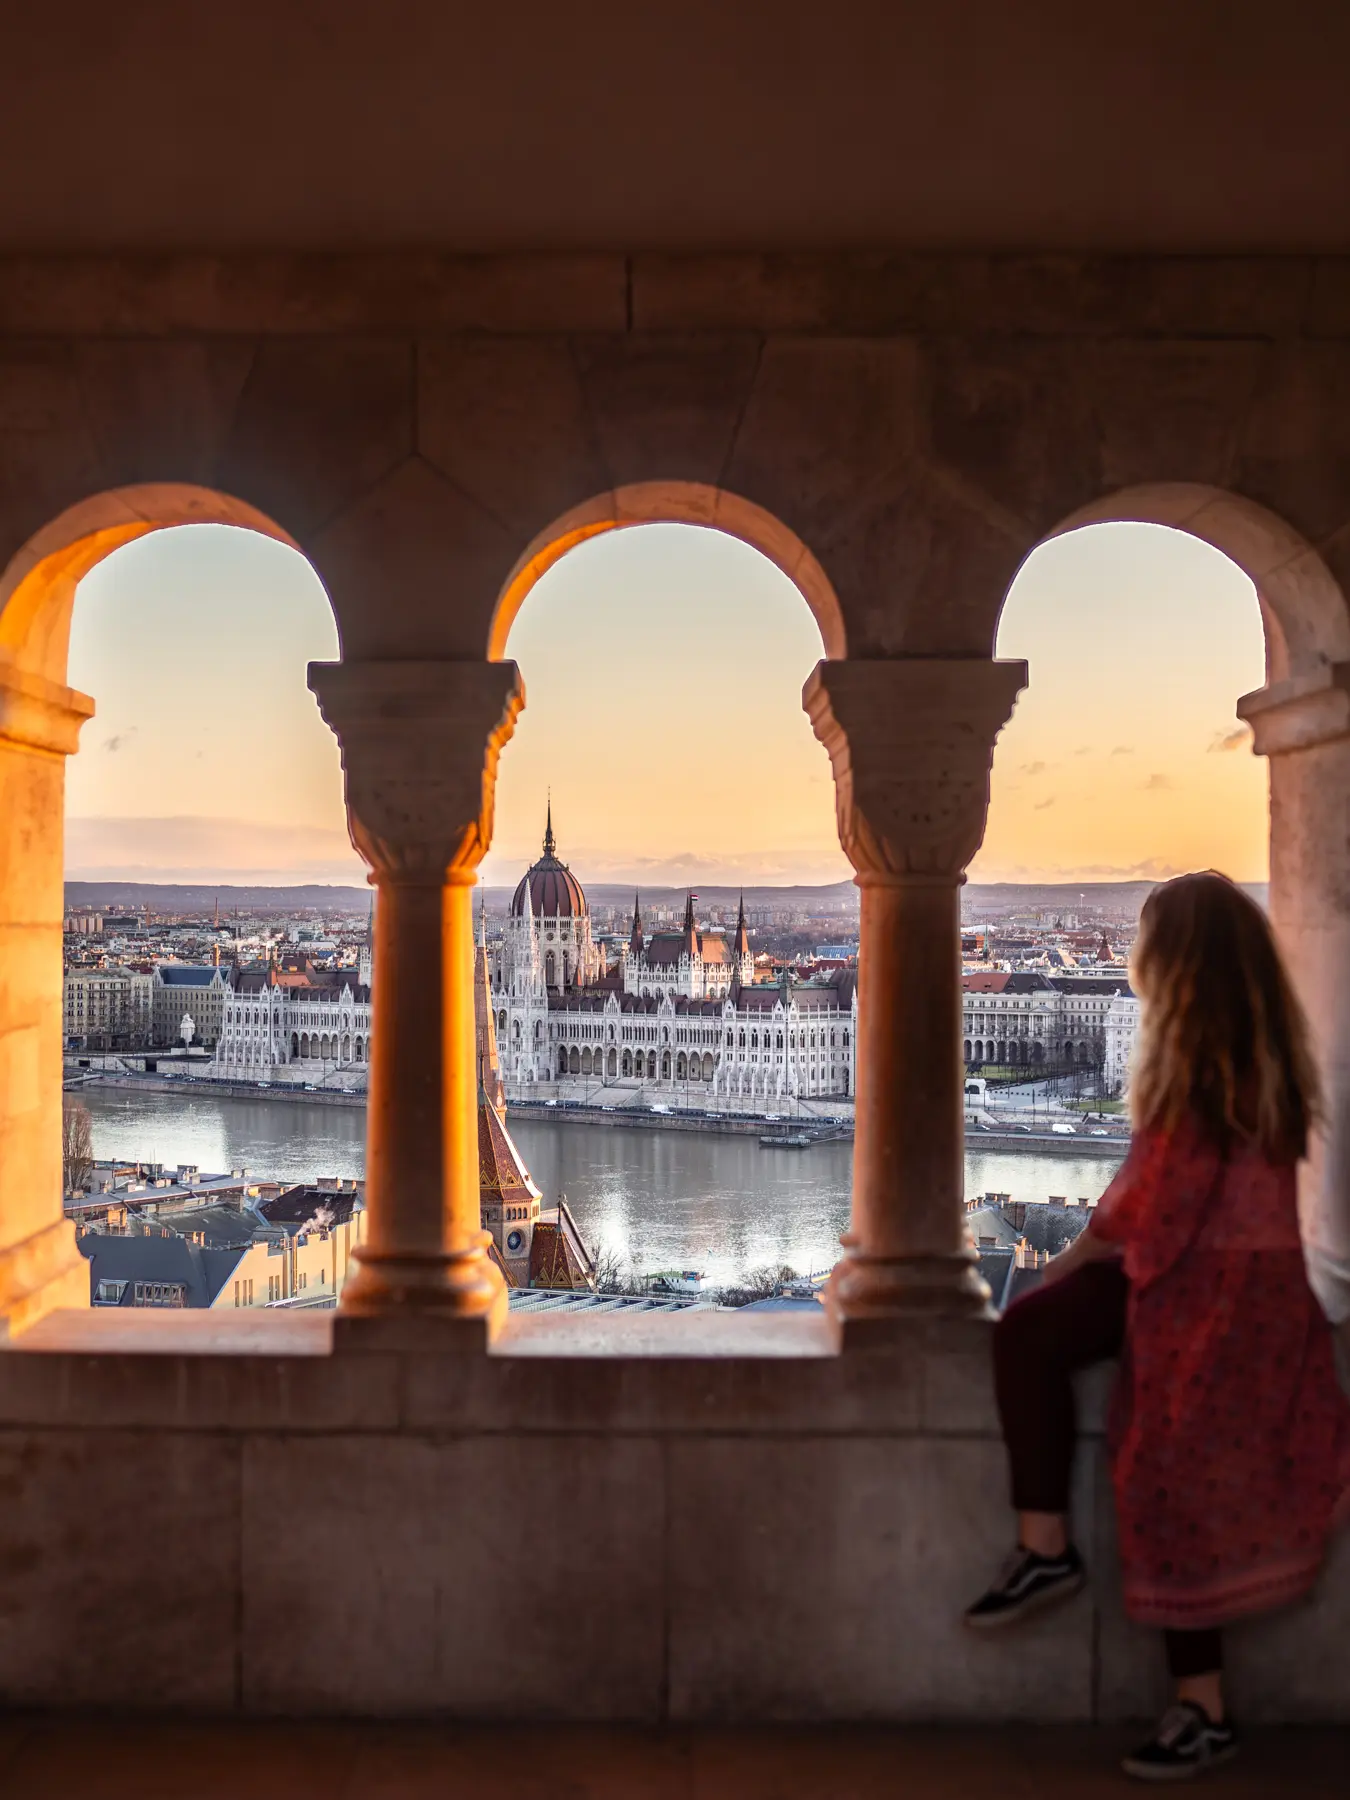 Girl in a pink kimono sitting in one og three arches at Fisherman's Bastian looking out over Budapest Parliament and hidden gems during sunrise.